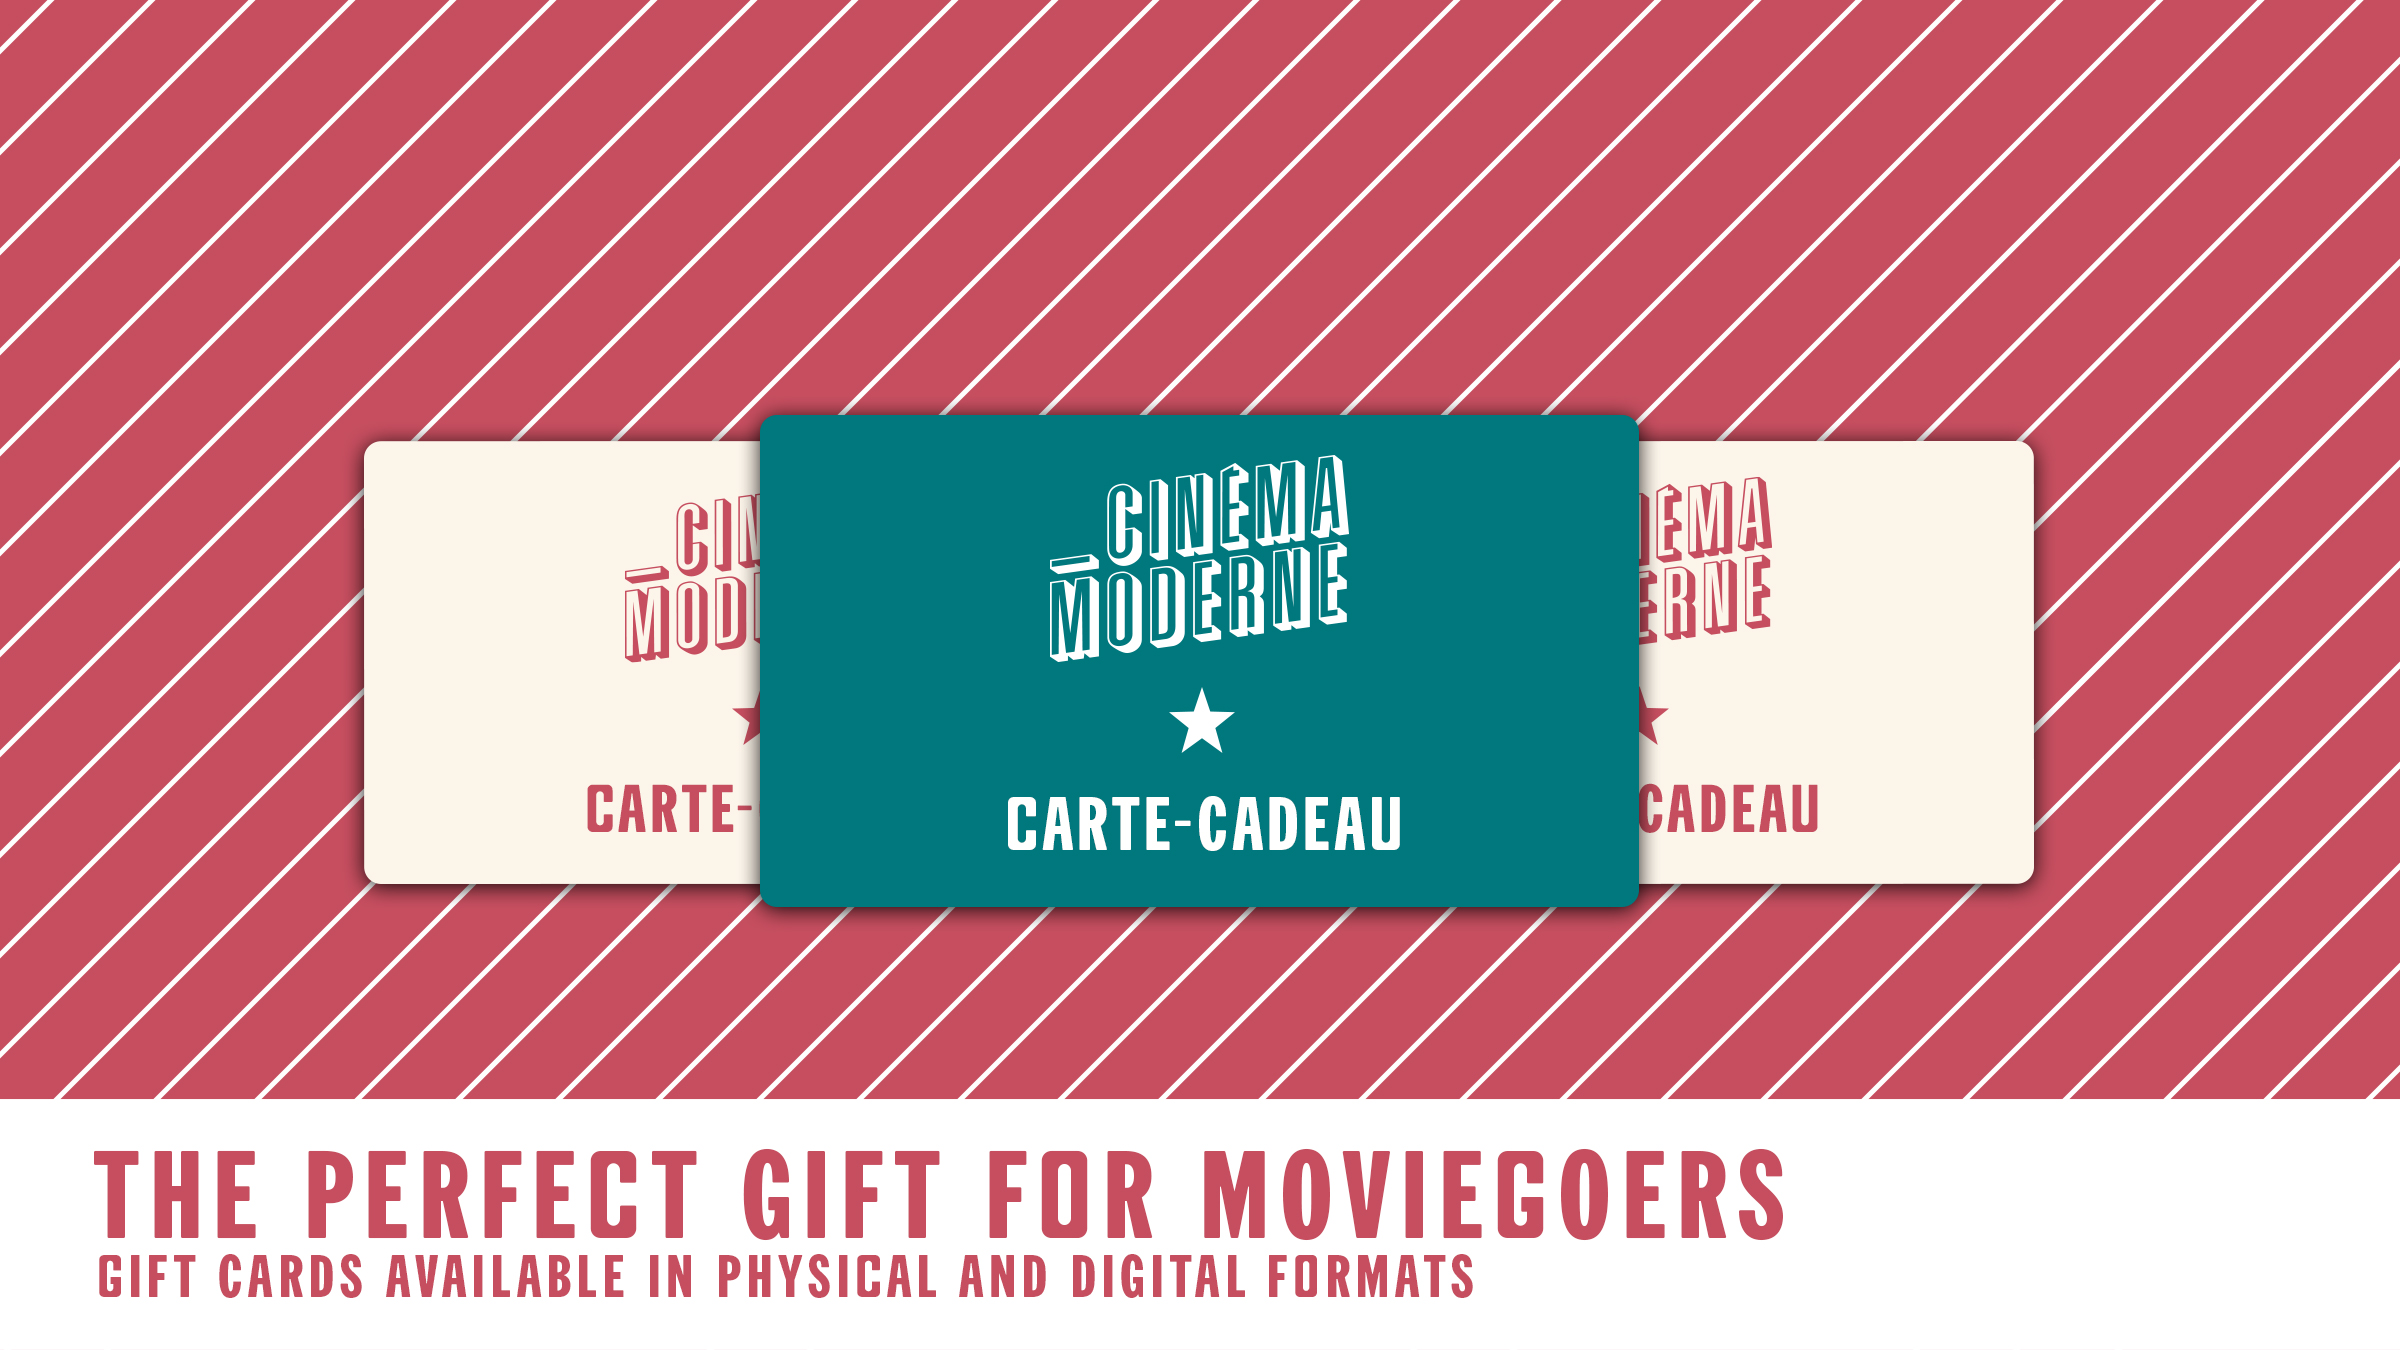 Design a gift card for trendy local cinema & bar | Postcard, flyer or print  contest | 99designs